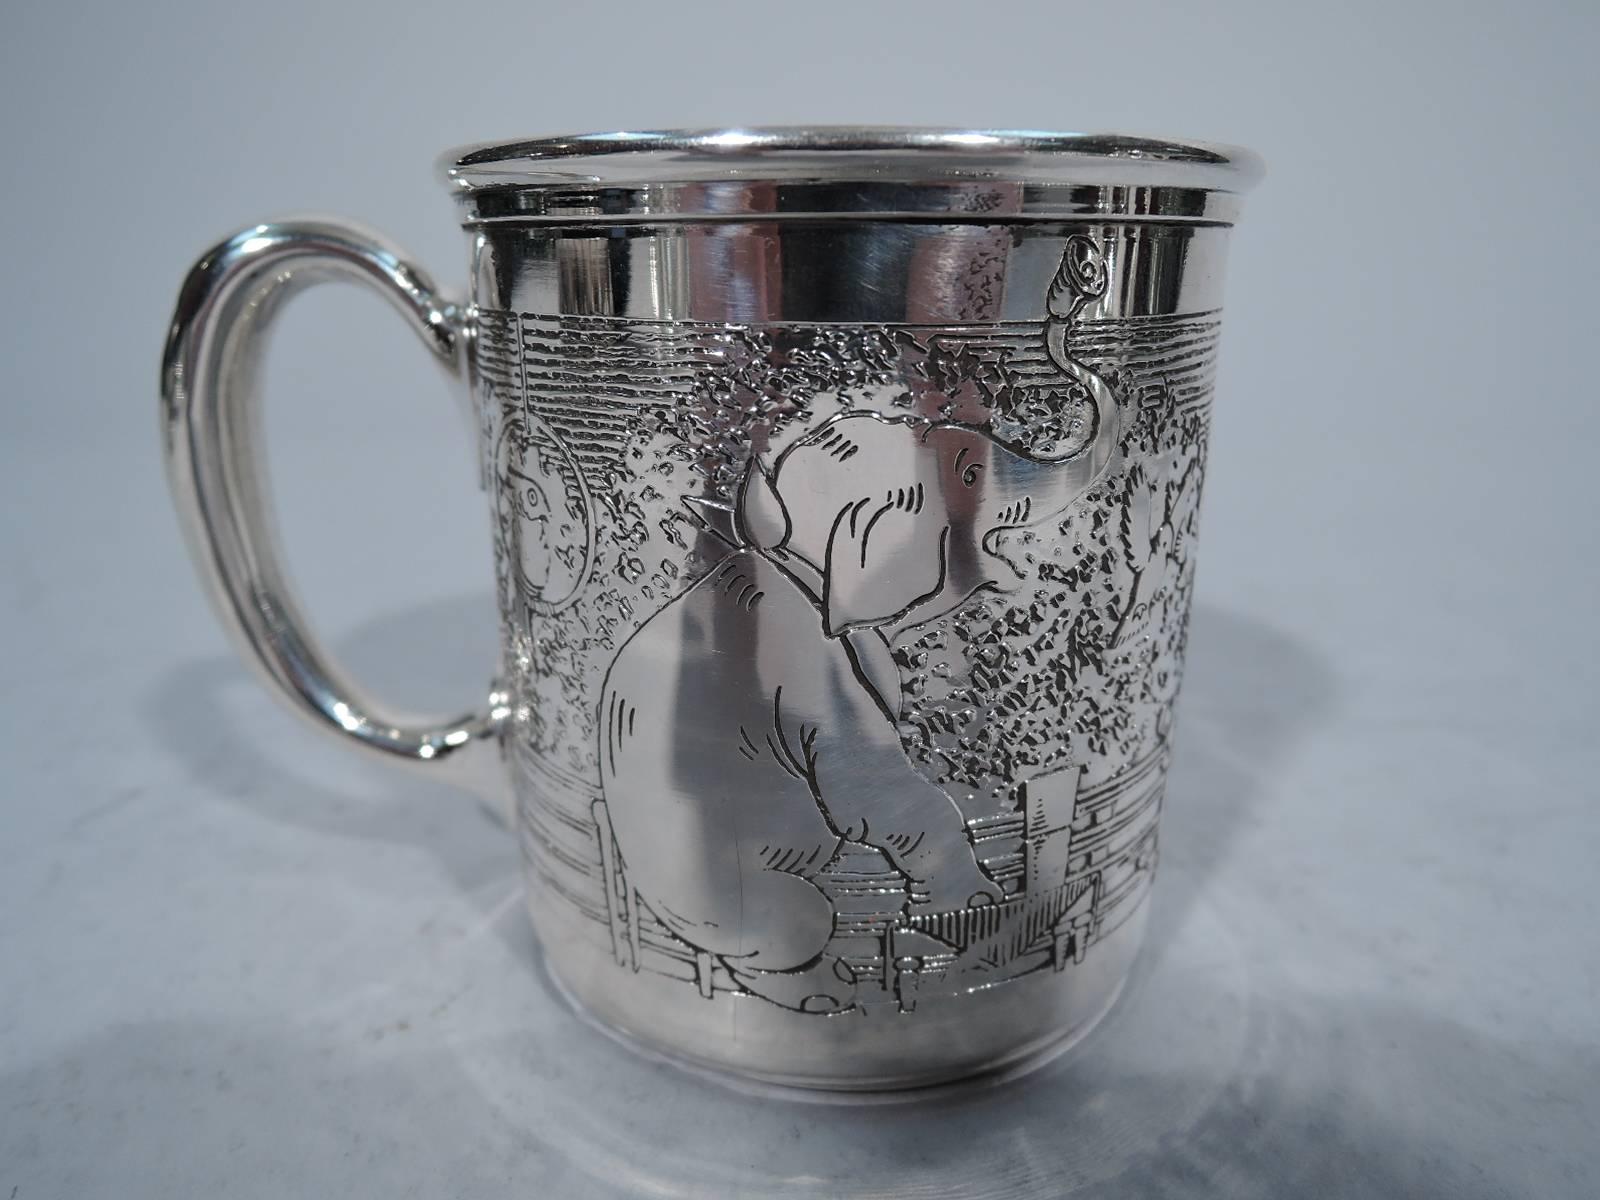 Sterling silver baby cup. Made by HR Morss & Co. in North Attleboro, circa 1930. Straight sides, molded rim and C-scroll handle. Acid-etched circus frieze with giraffe, elephant, dancing dog, and clown surrounding a vacant cartouche where can be